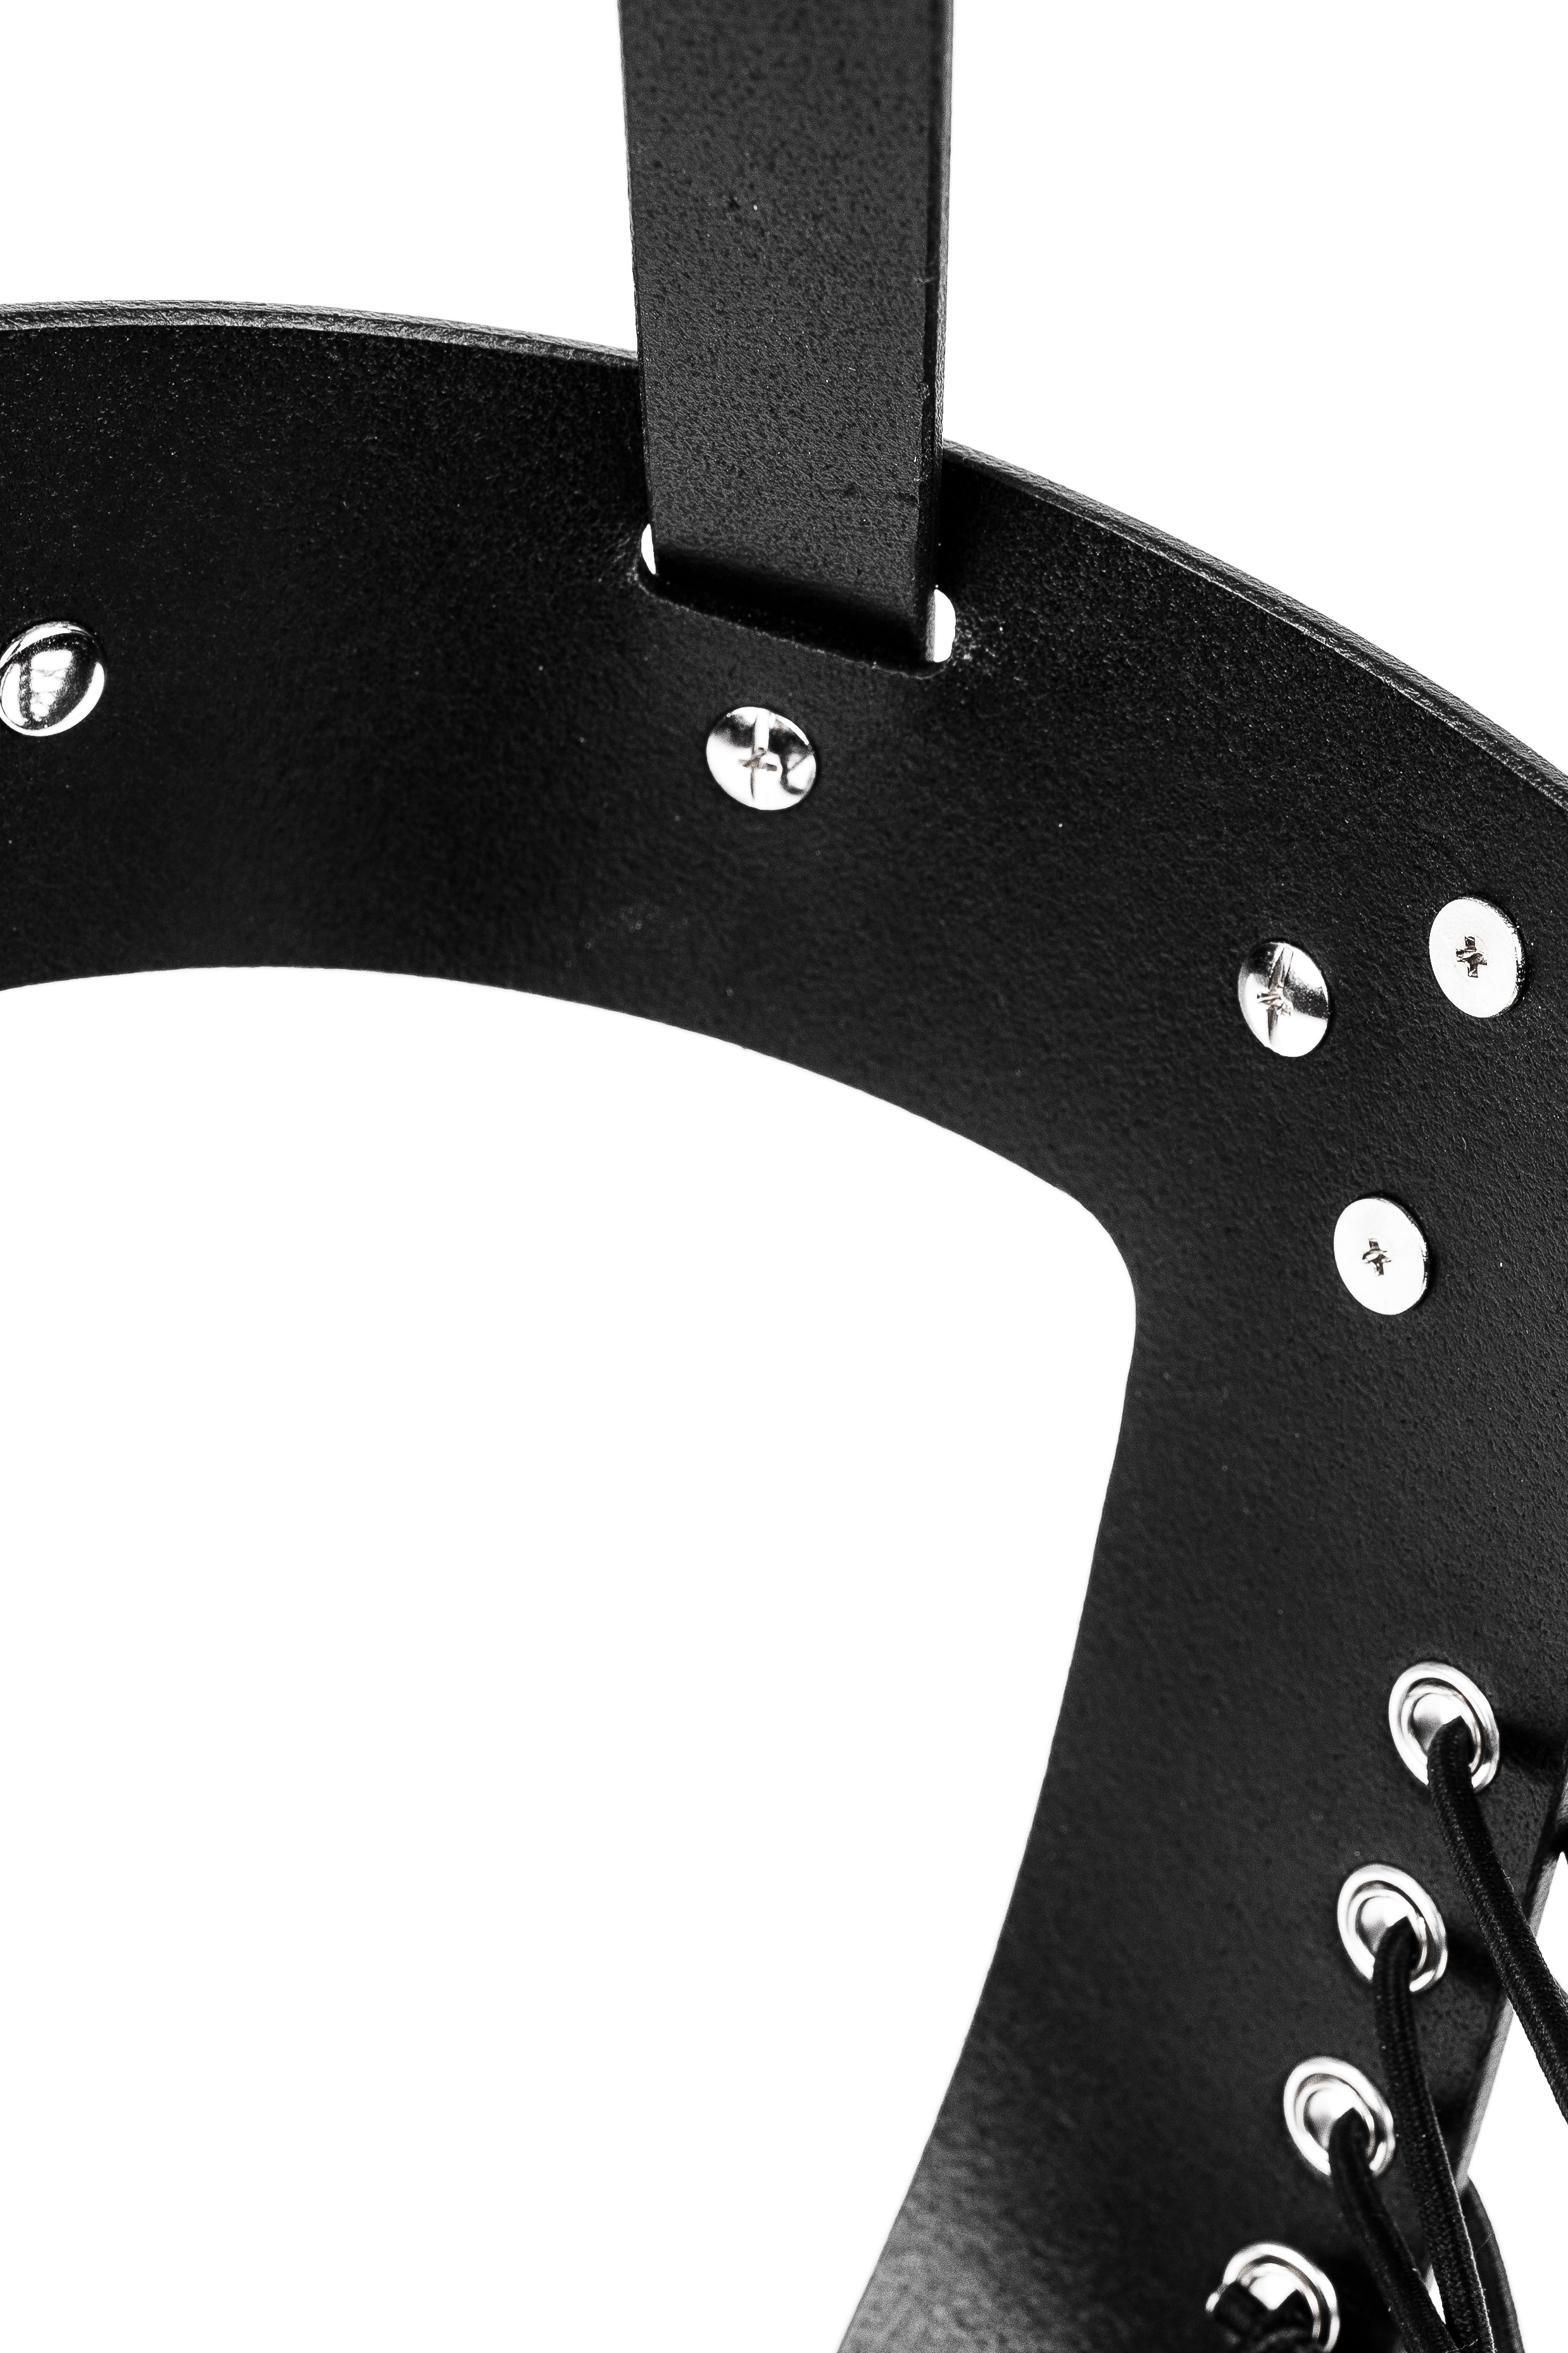 Two-Pieces BDSM Leather Mask